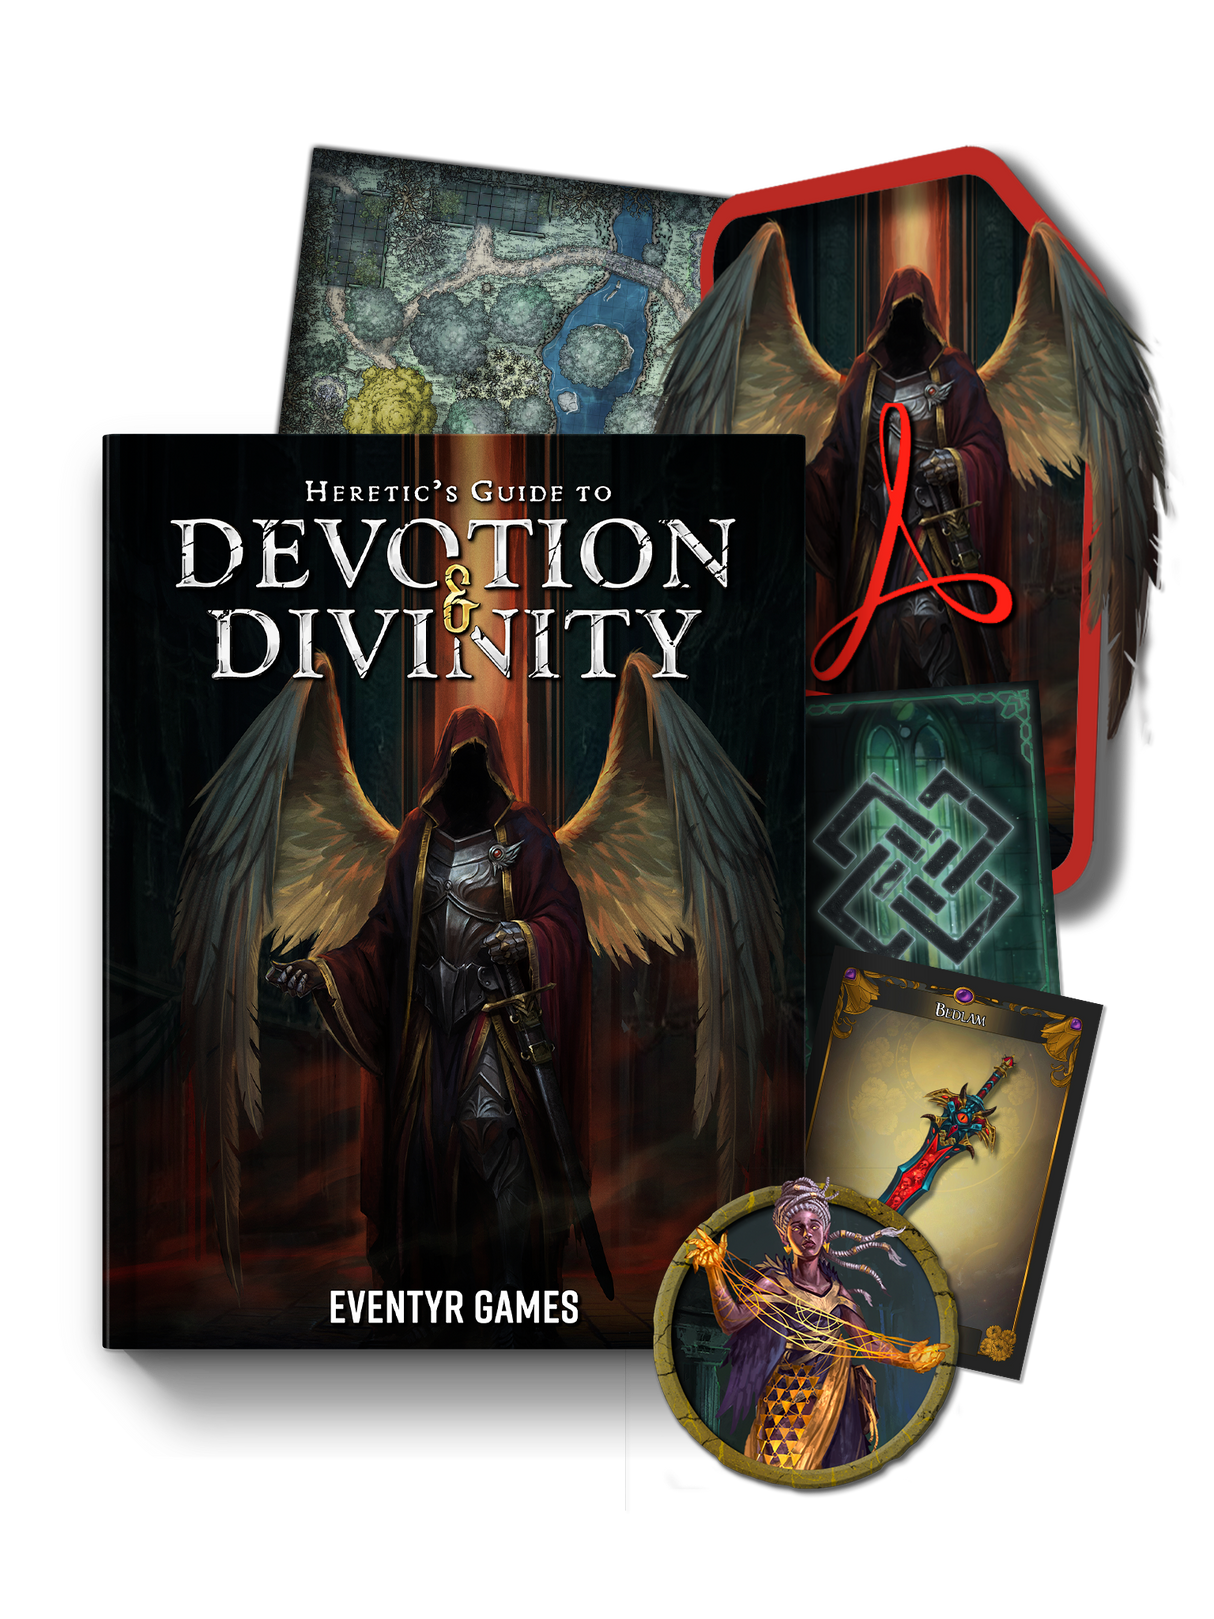 Heretic's Guide to Devotion & Divinity Bundle (Hardcover + PDF)